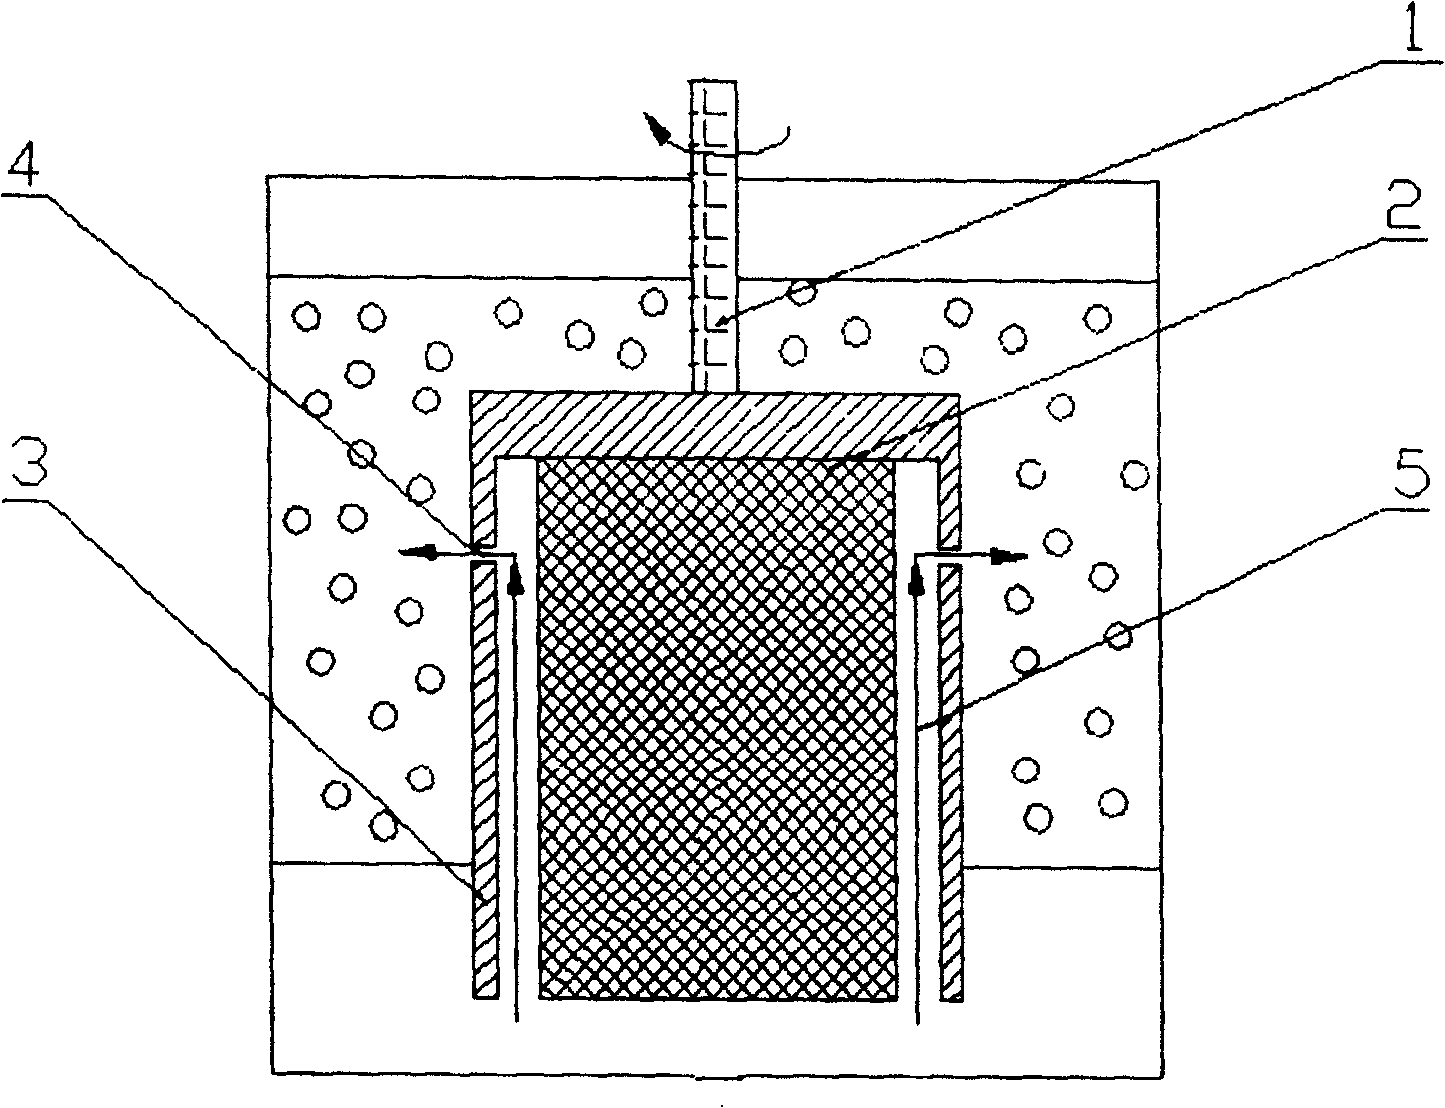 An even low-shearing self-absorbing emulsion droplet preparation device